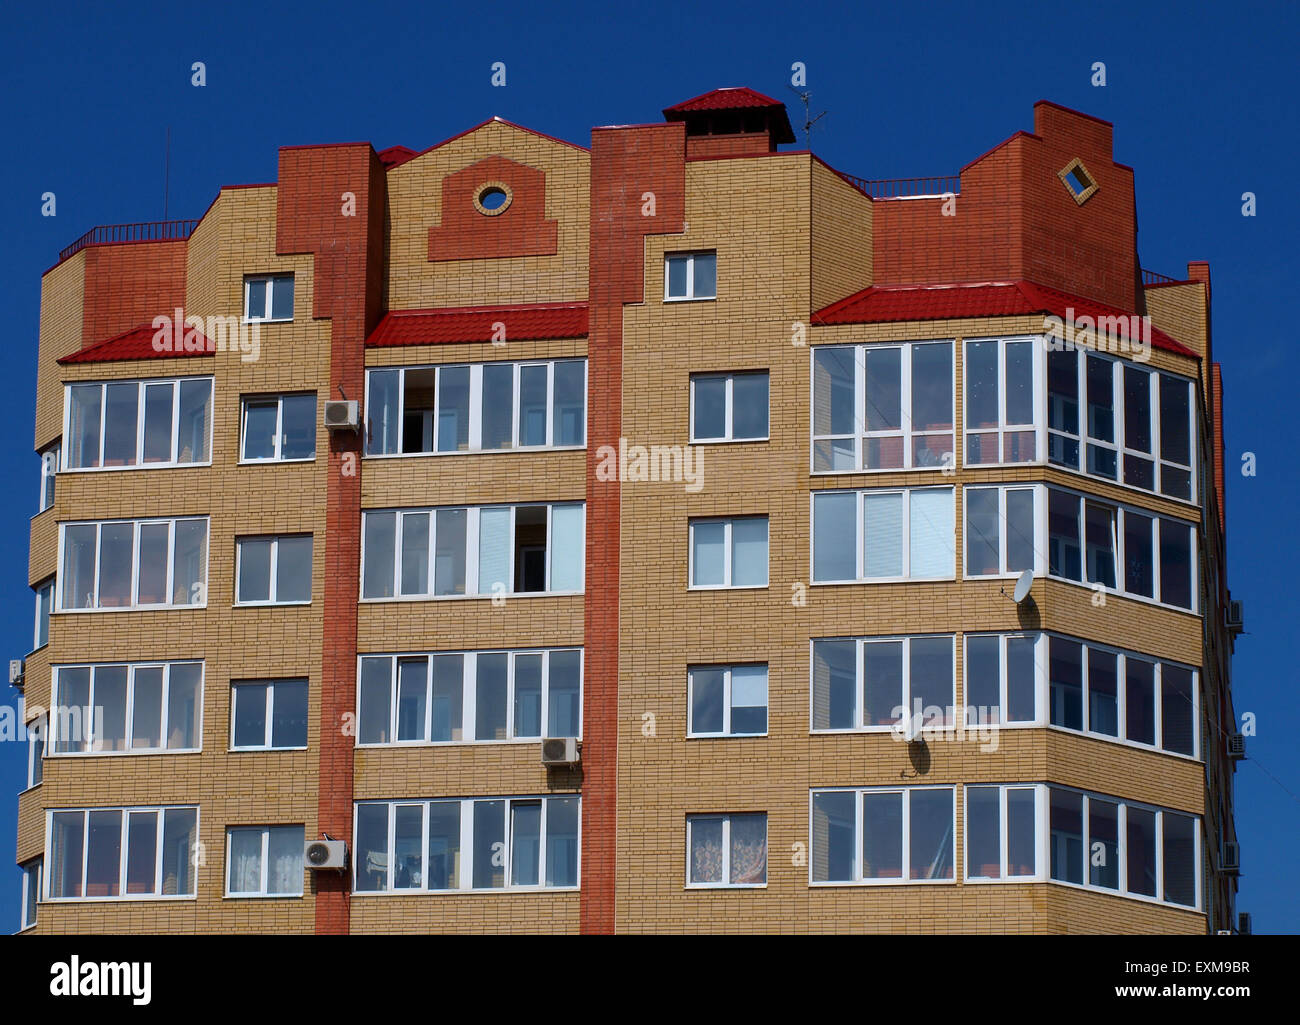 The upper floors of multistory building against the blue sky without clouds Stock Photo